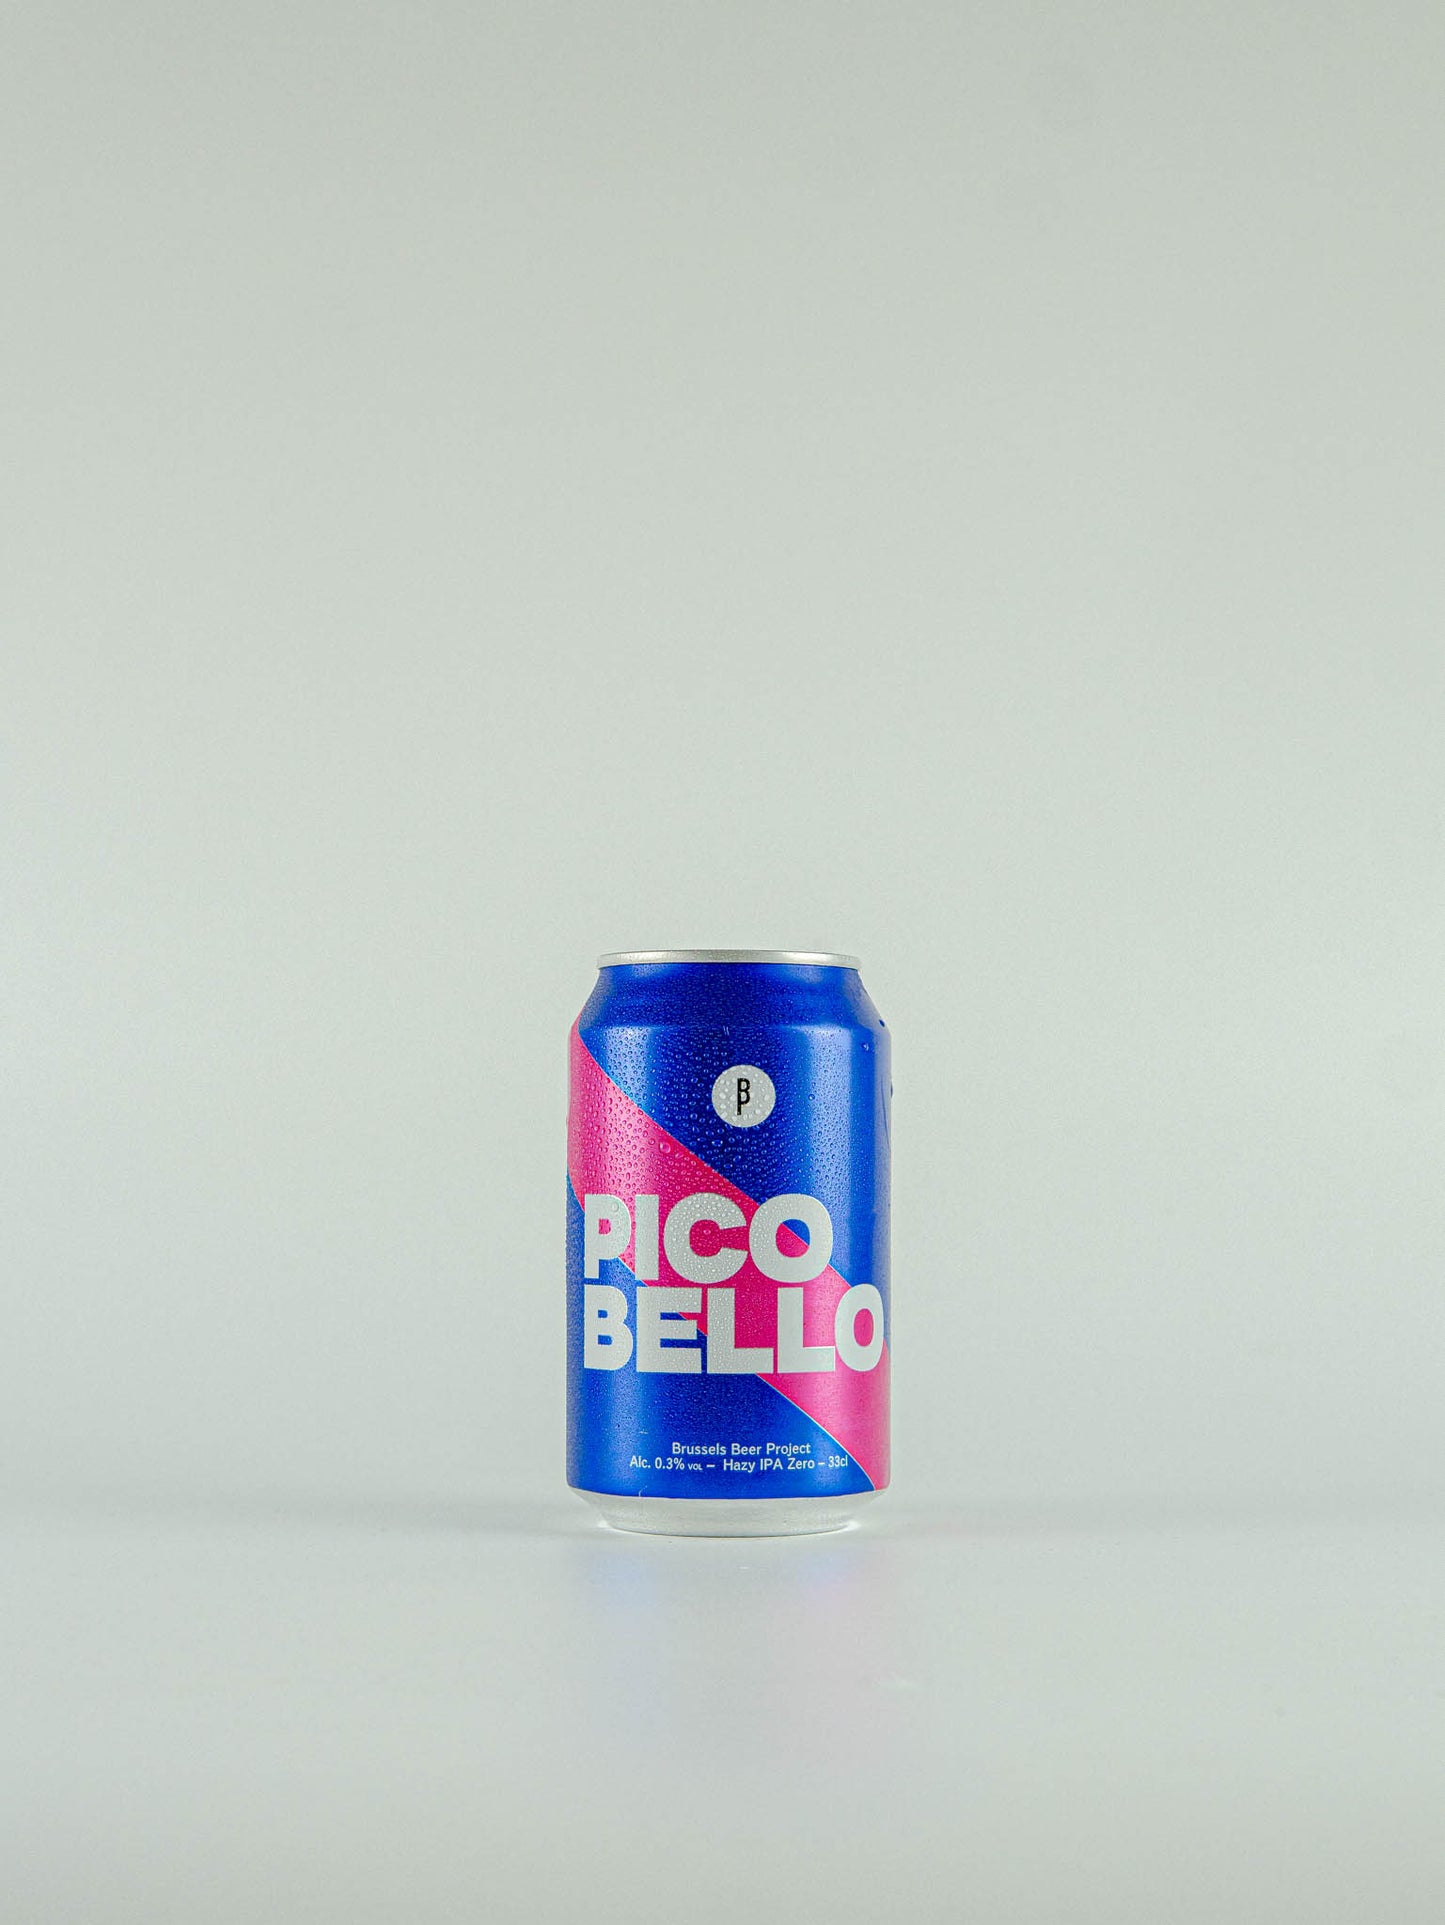 Brussels Beer Project Pico Bello Hazy IPA 0.3% - 330ml